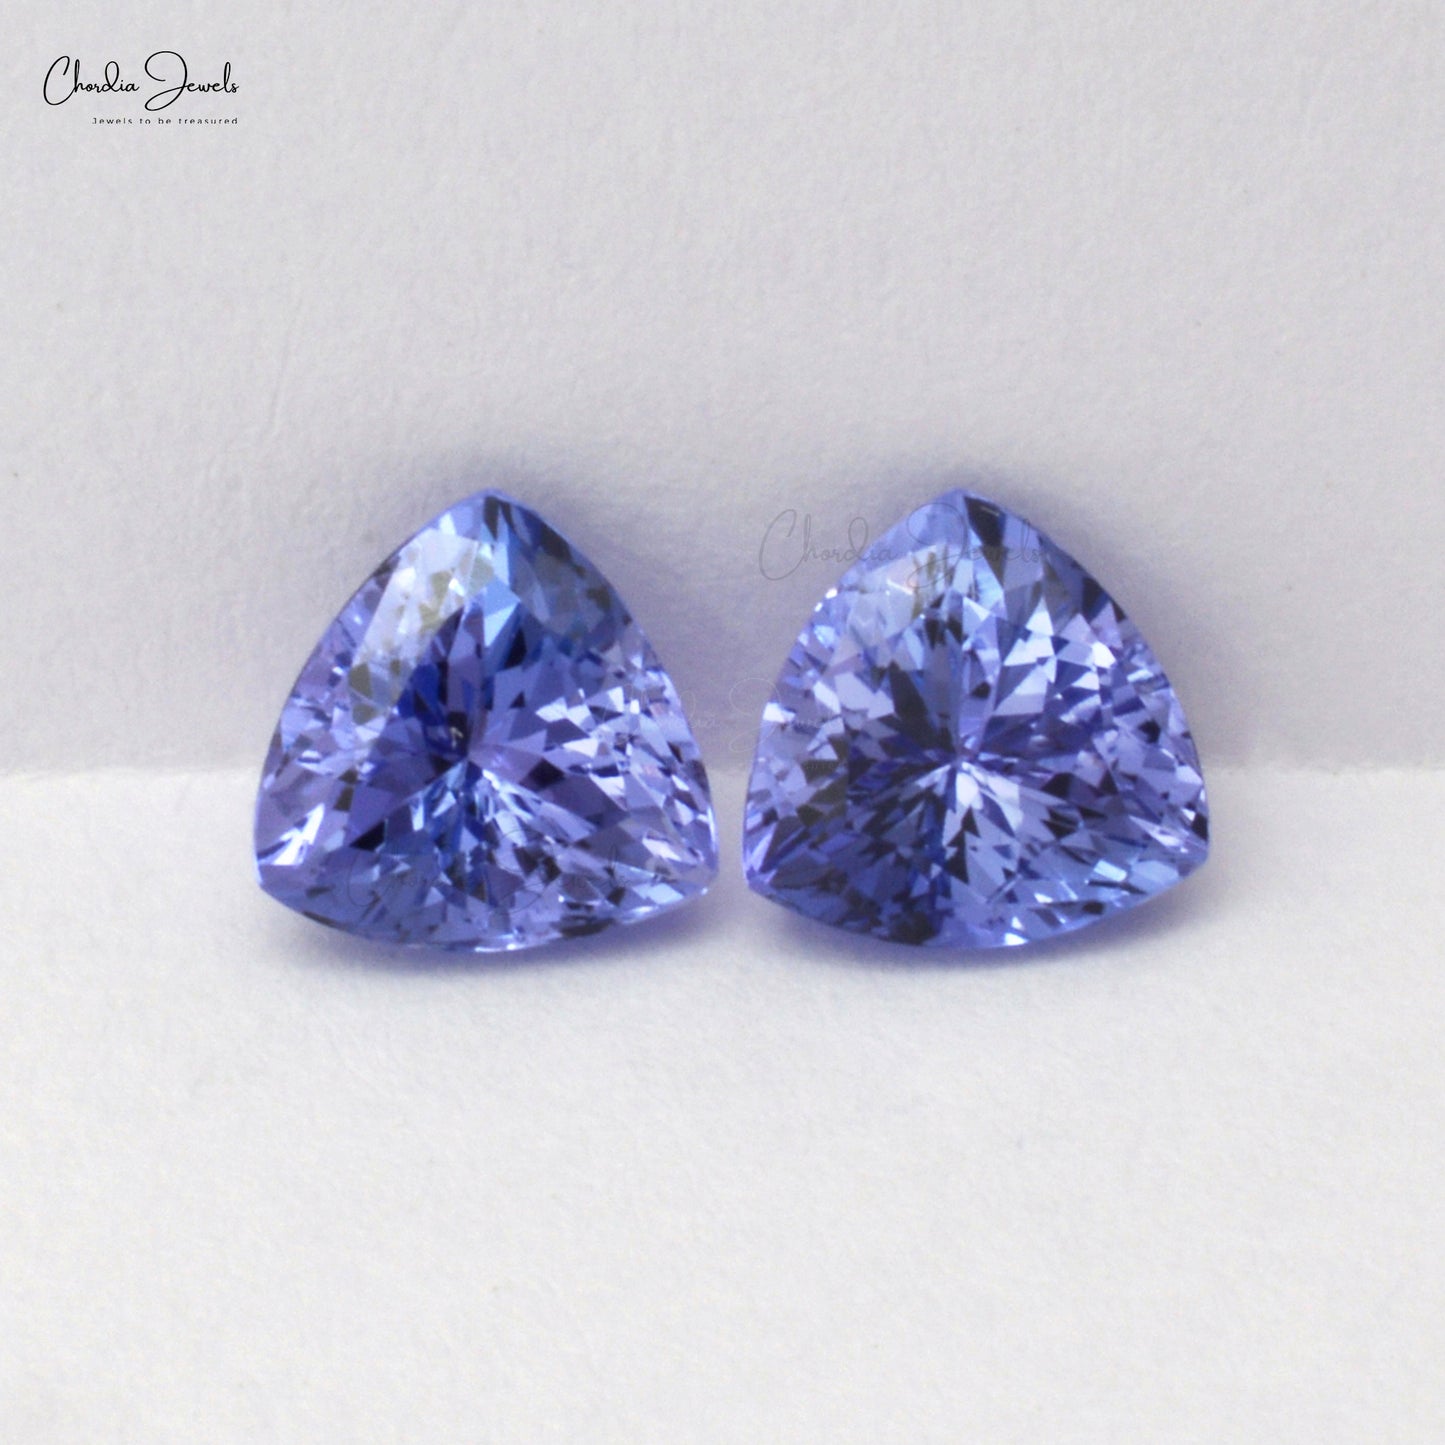 2.61 Carats Tanzanite 7X7MM Trillion Cut Natural Gemstone For Earring, 2 Piece